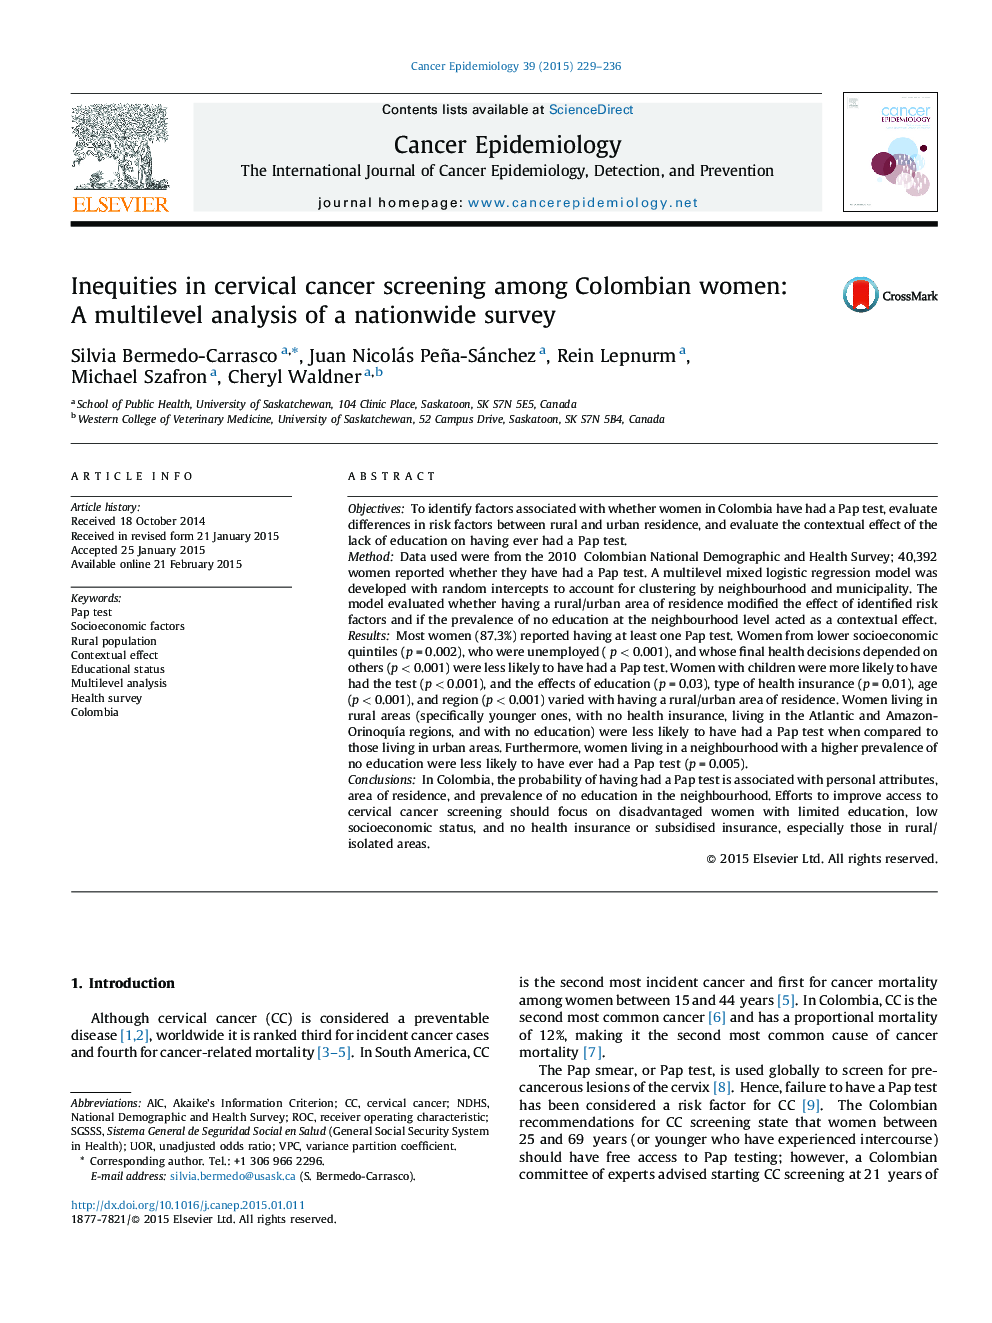 Inequities in cervical cancer screening among Colombian women: A multilevel analysis of a nationwide survey